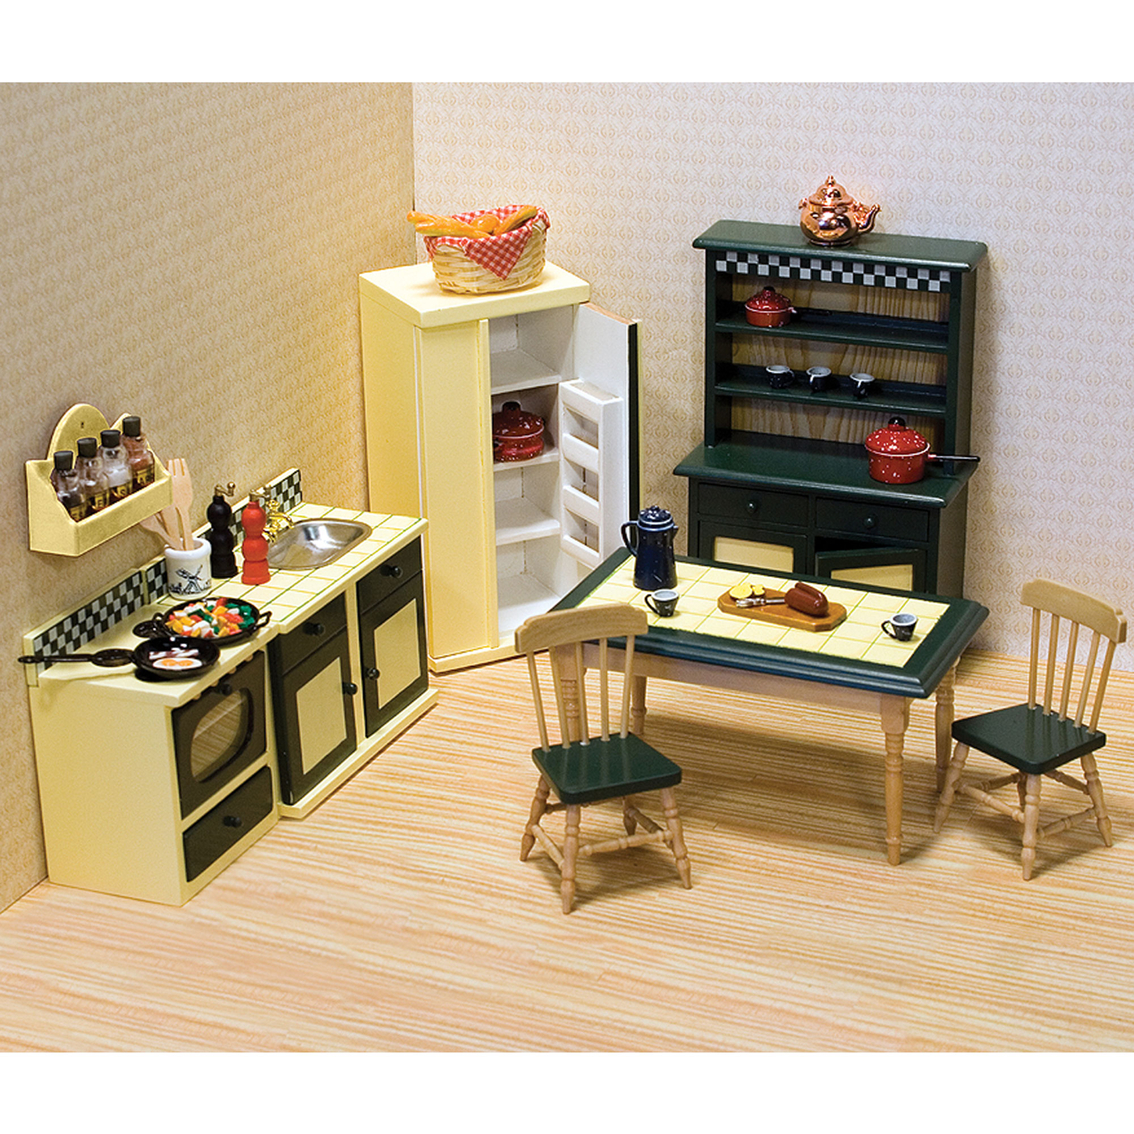 baby doll house kitchen